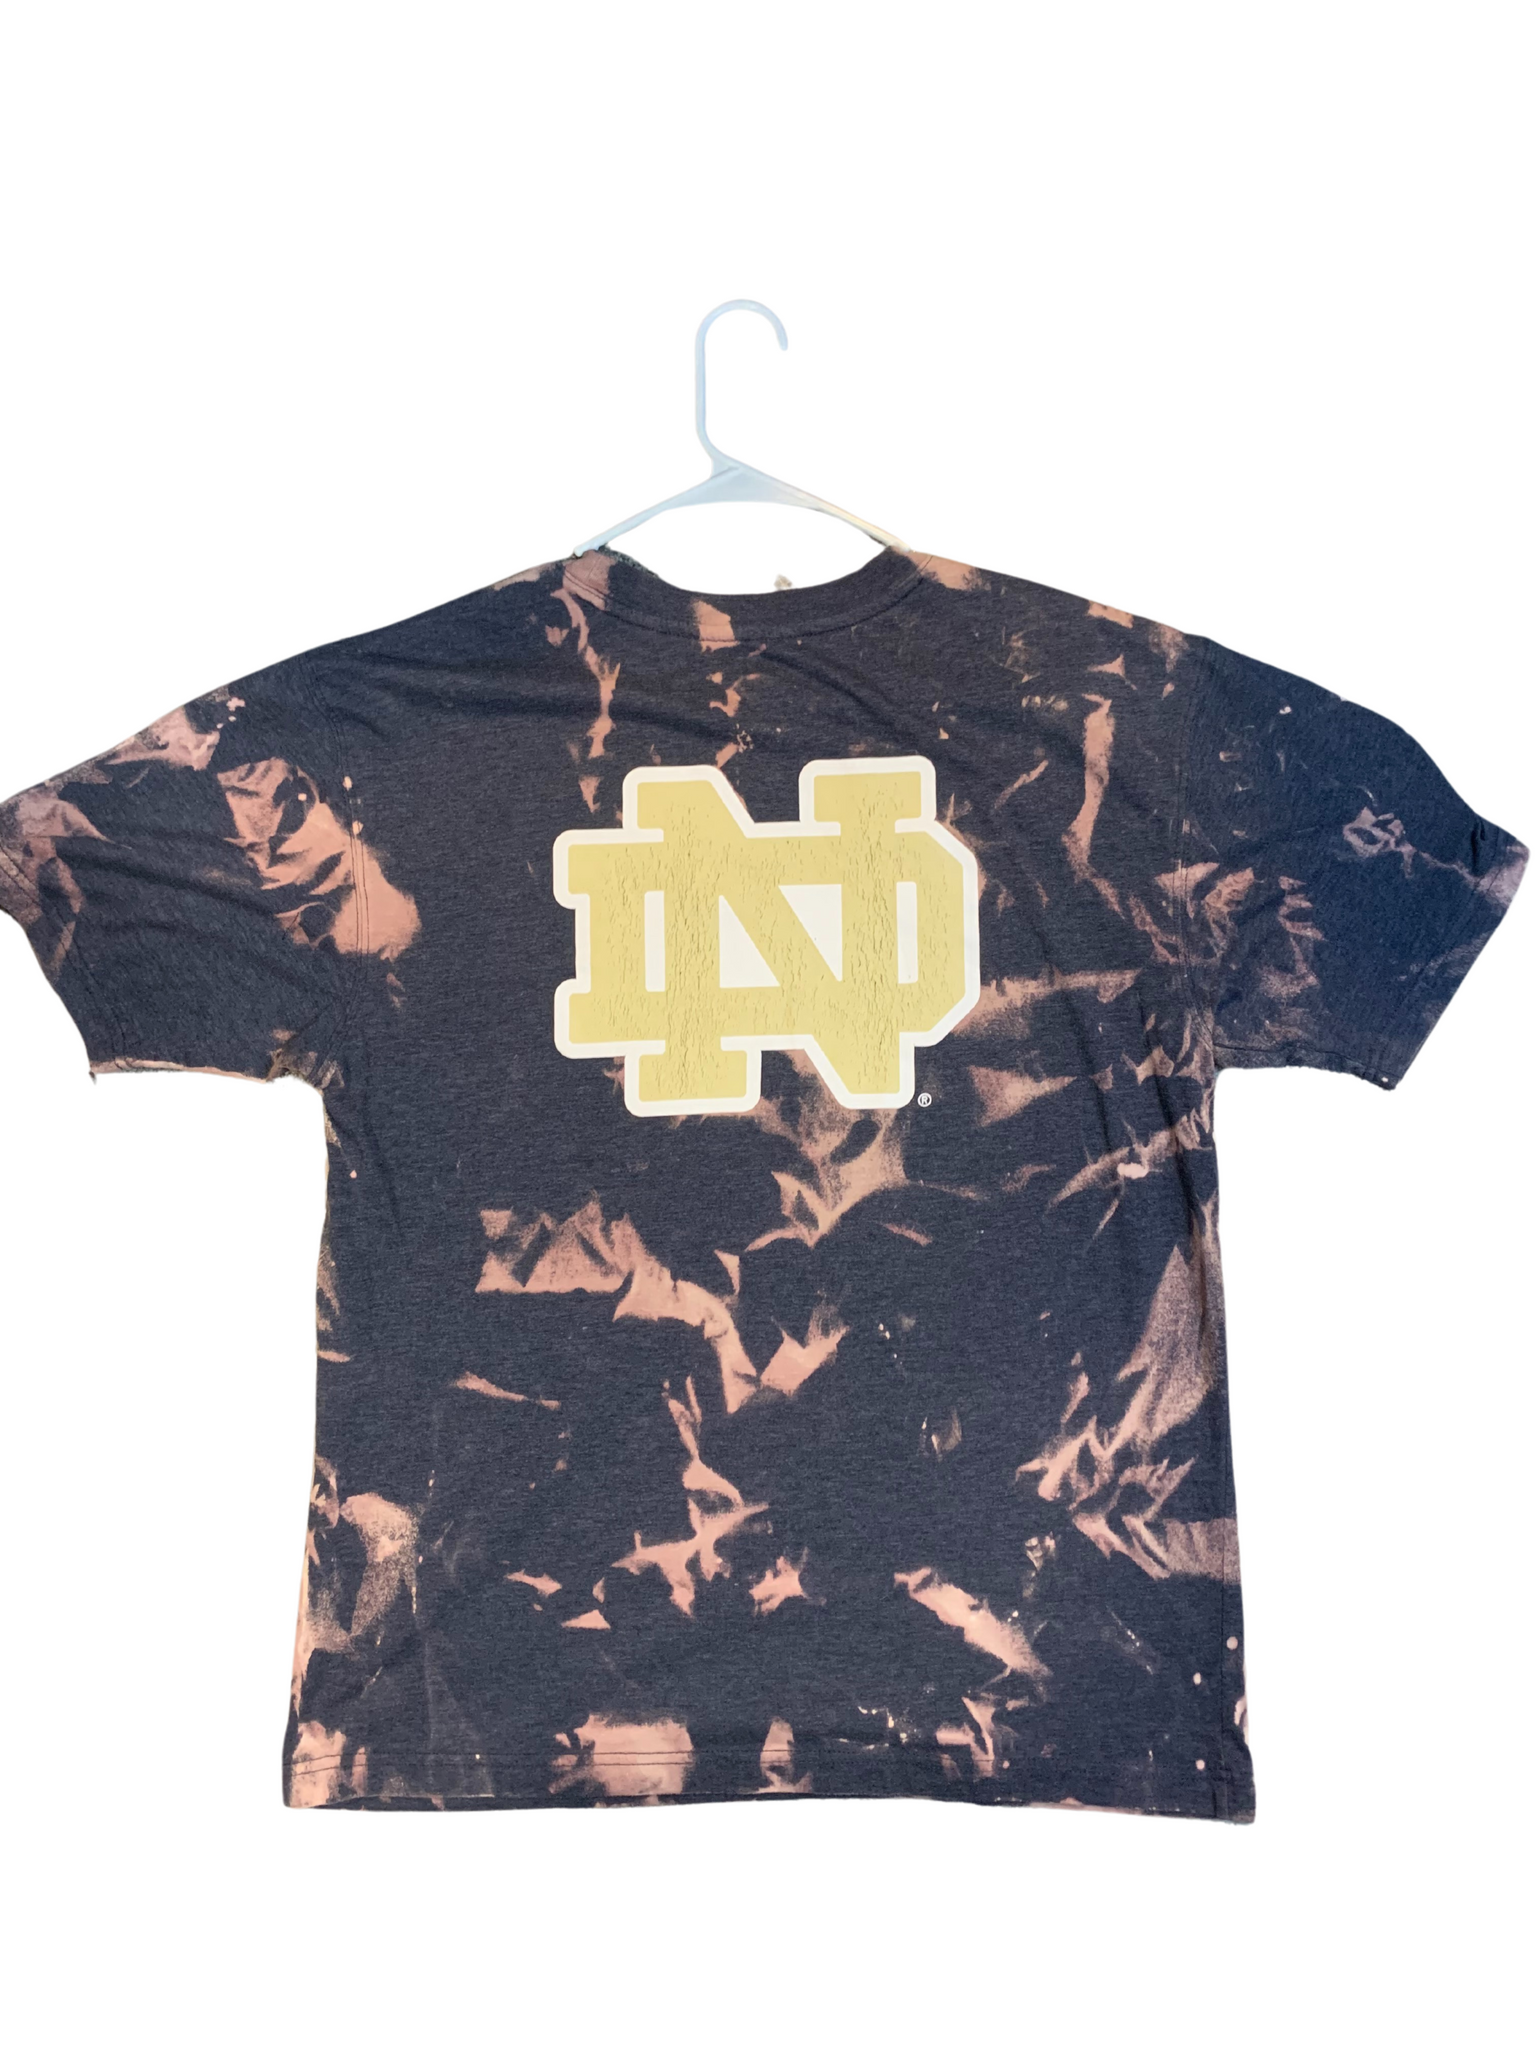 University of Notre Dame Bleached Shirt